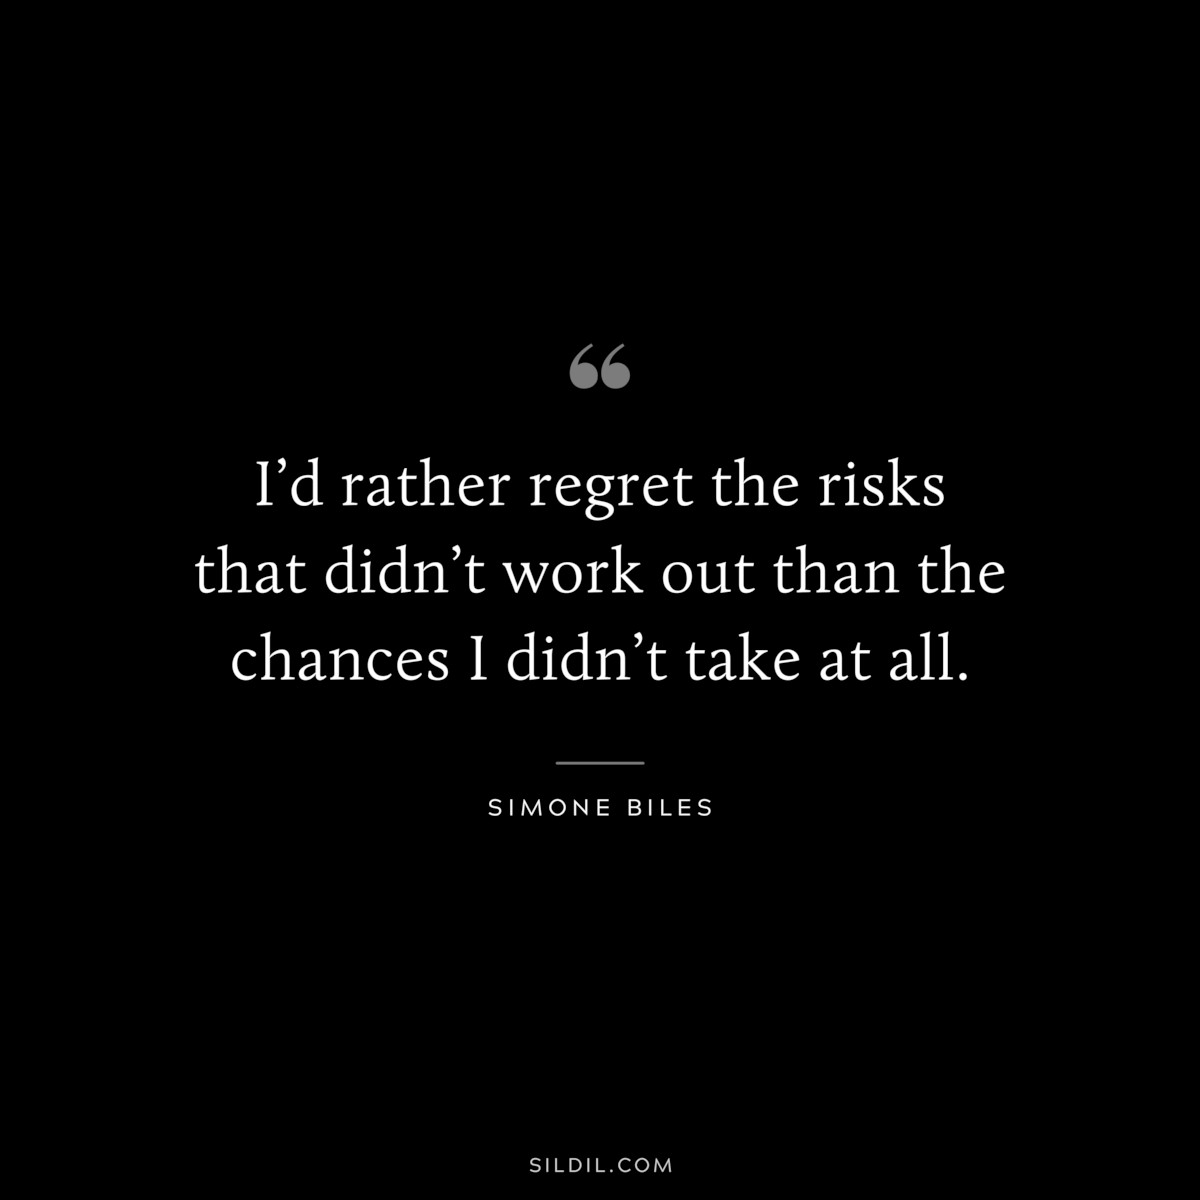 I’d rather regret the risks that didn’t work out than the chances I didn’t take at all. ― Simone Biles